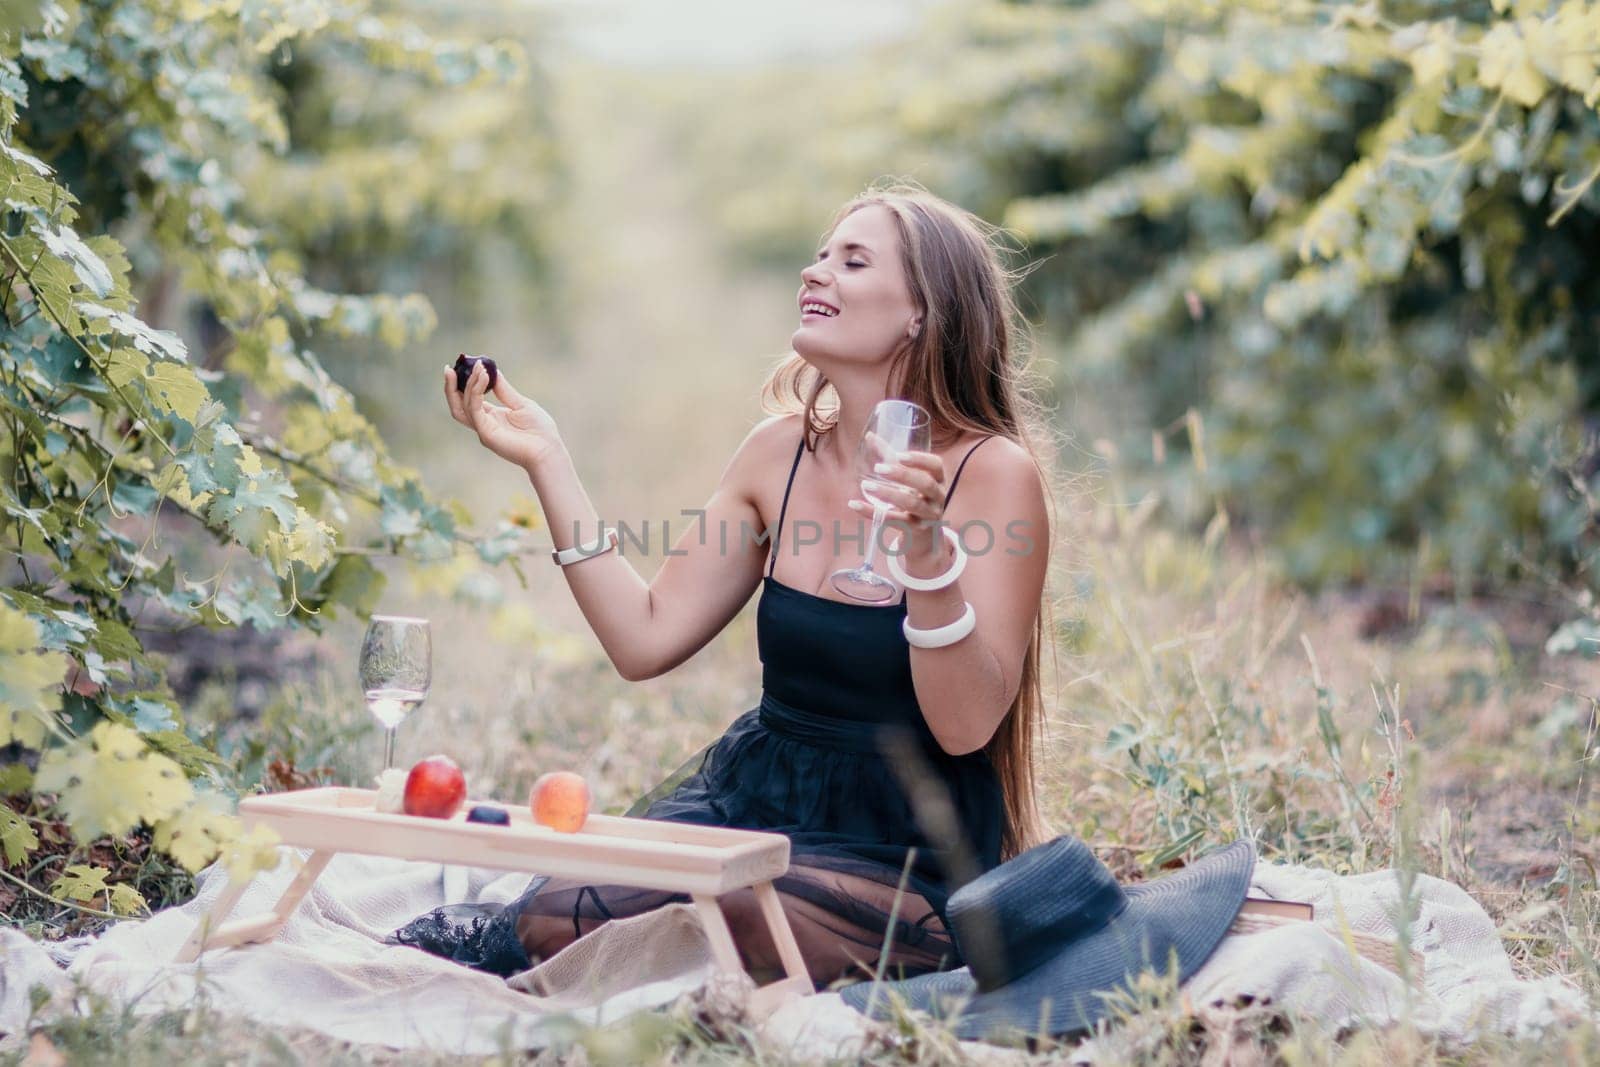 Picnic and wine tasting at sunset in the hills of Italy, Tuscany. Vineyards and open nature in the summer. Romantic dinner, fruit and wine.